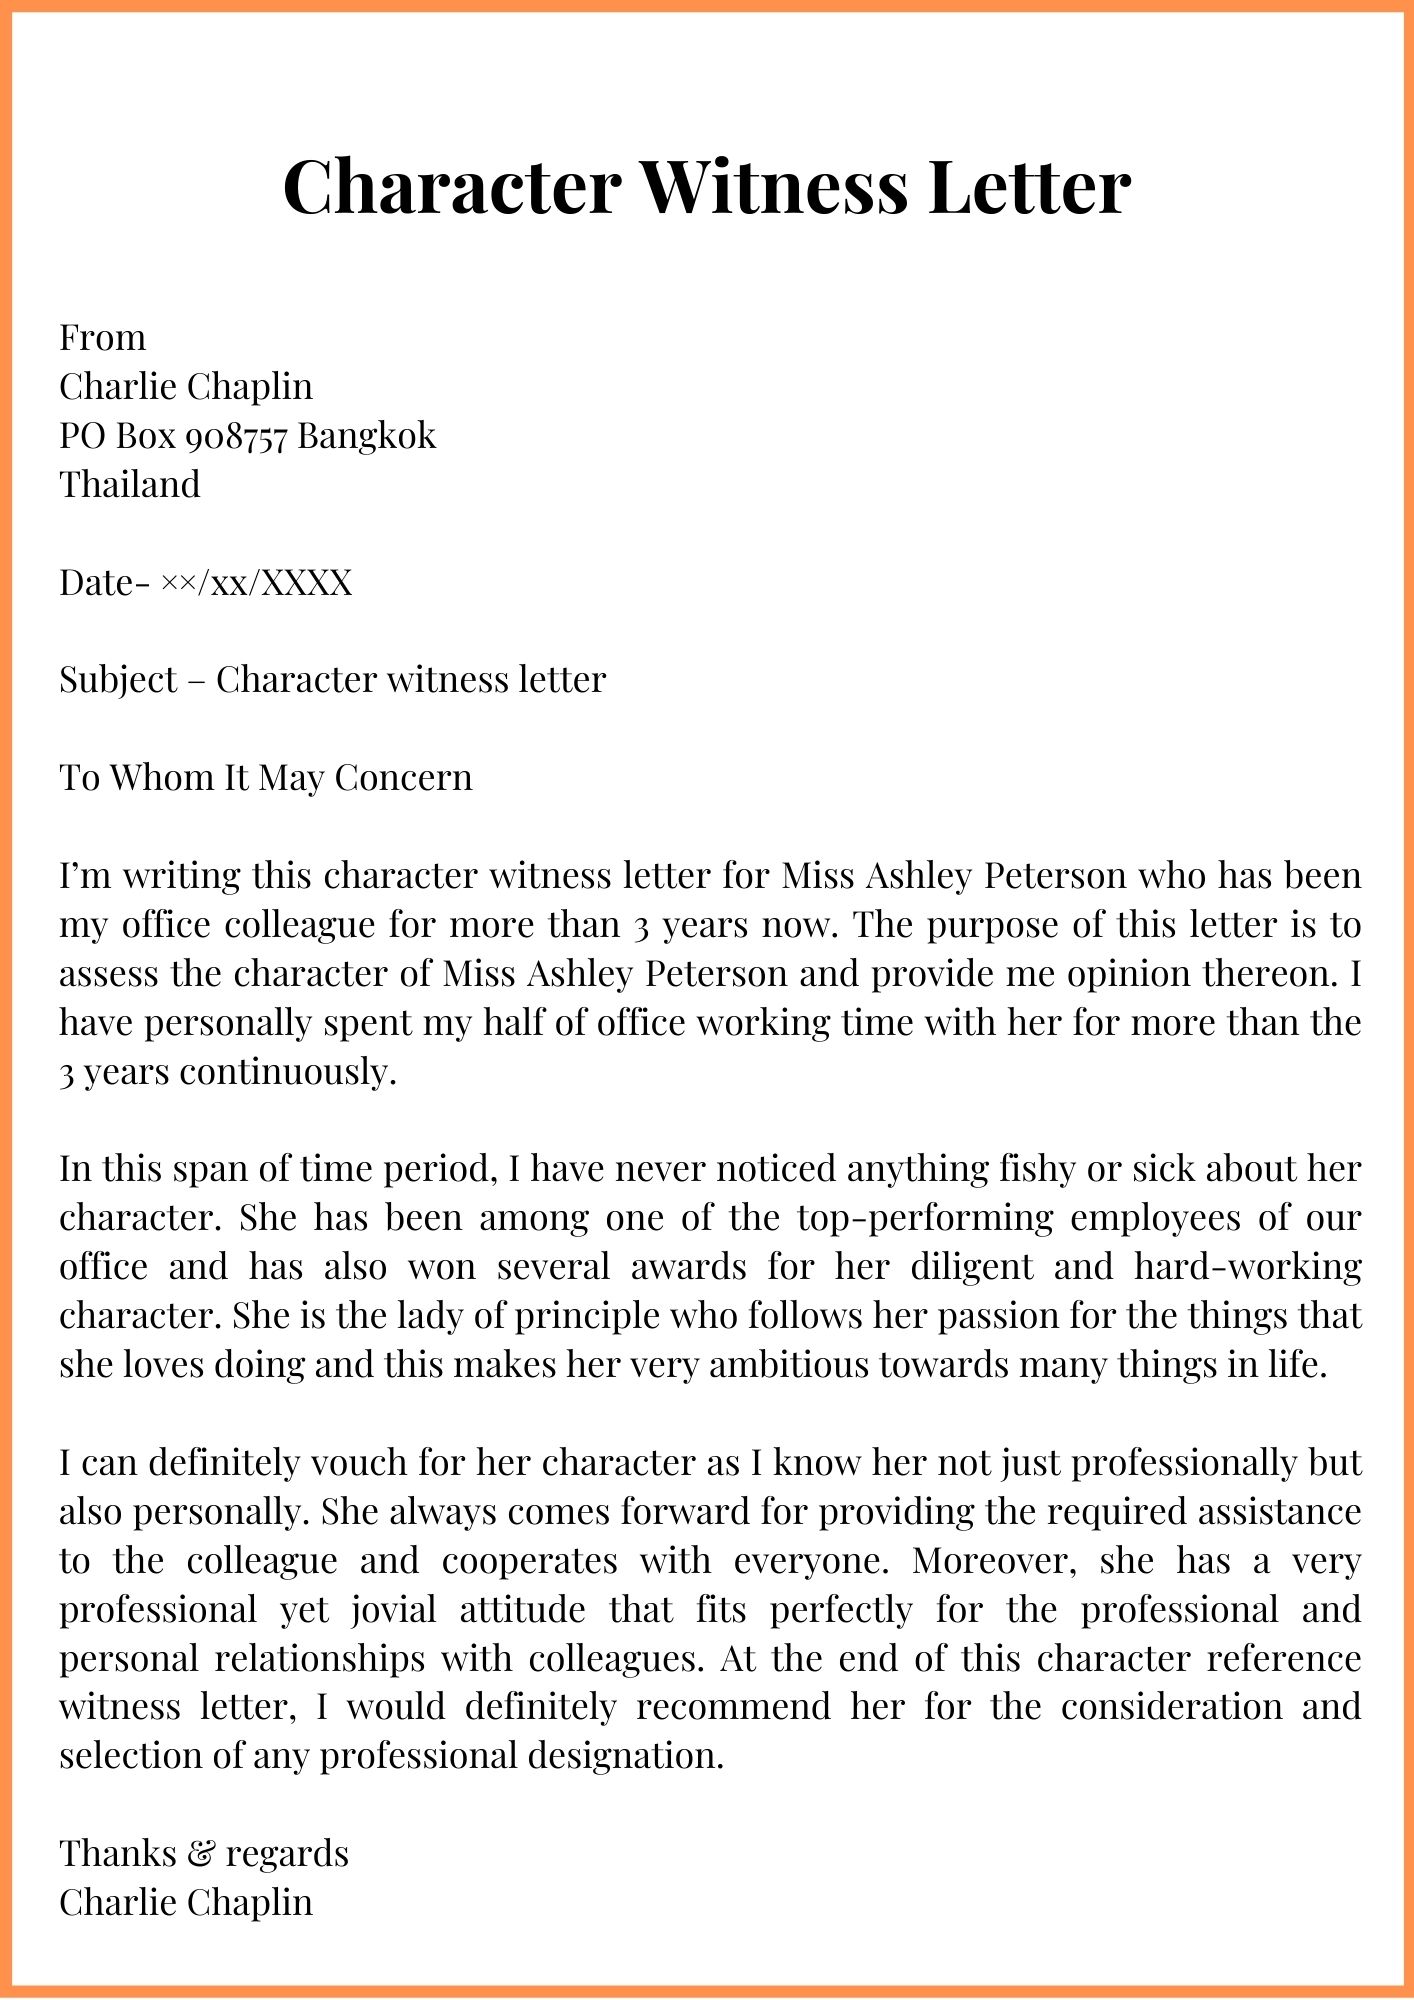 character-witness-letter-template-character-reference-letter